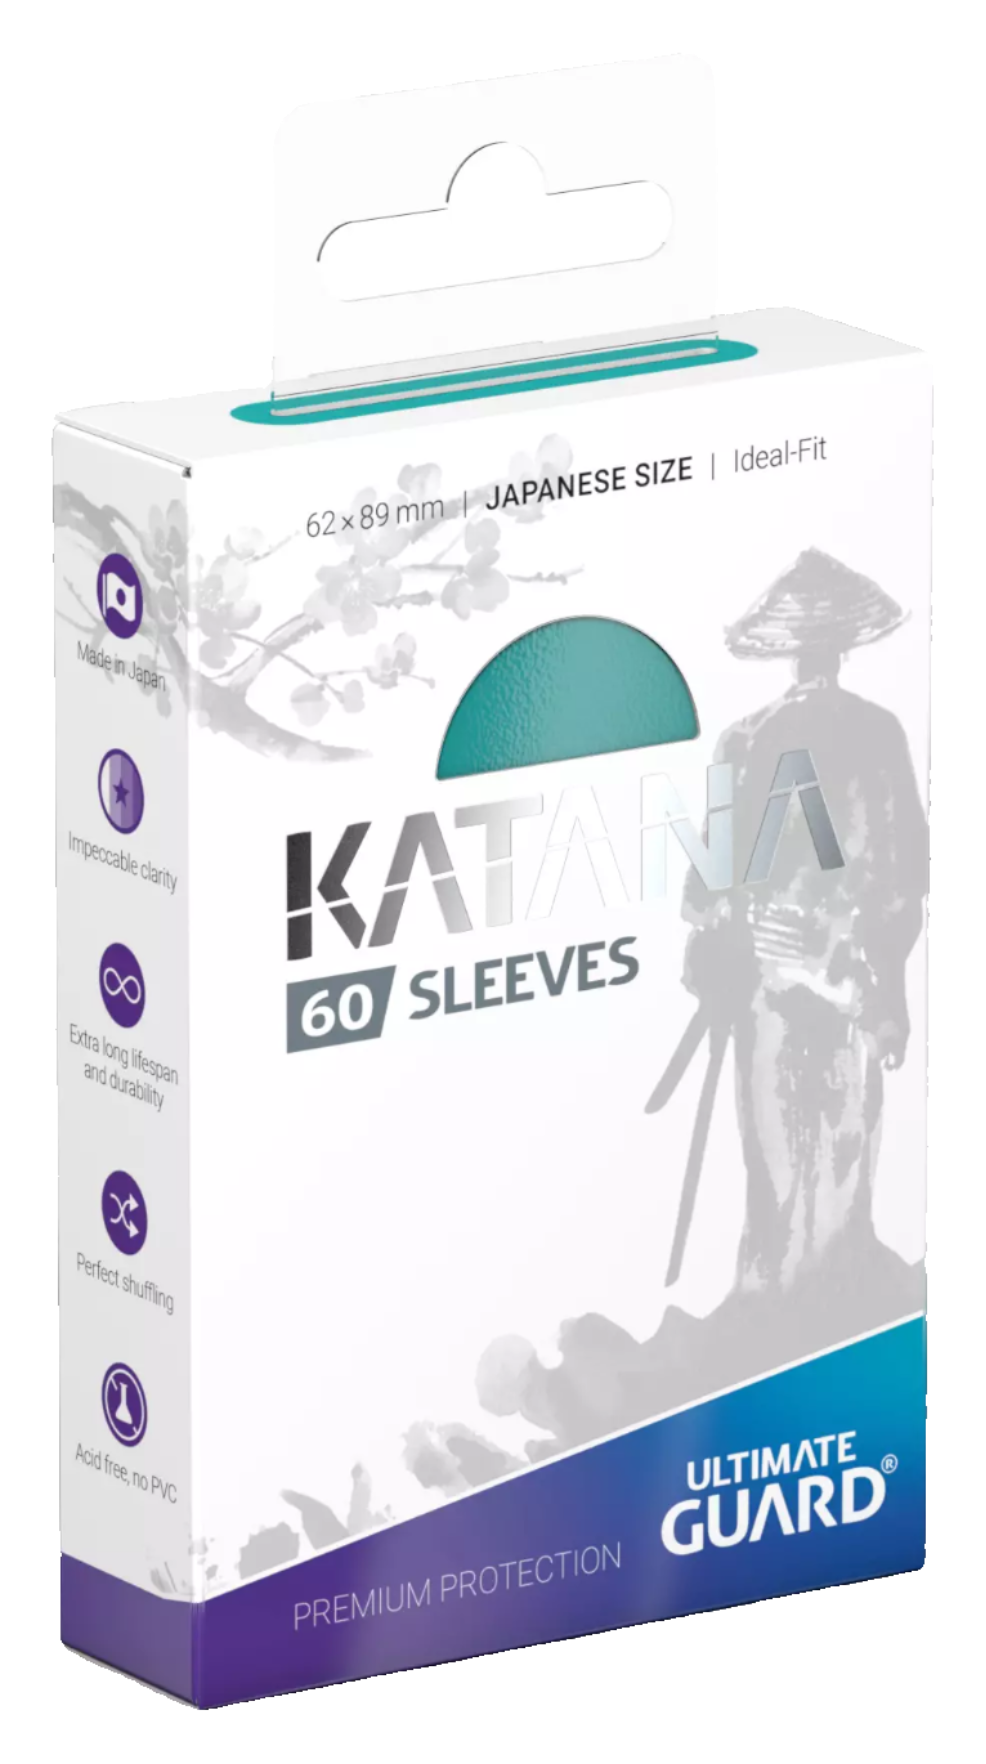 Ultimate Guard - Katana Sleeves - Japanese Size - Ideal-Fit - Turquoise - 60pk